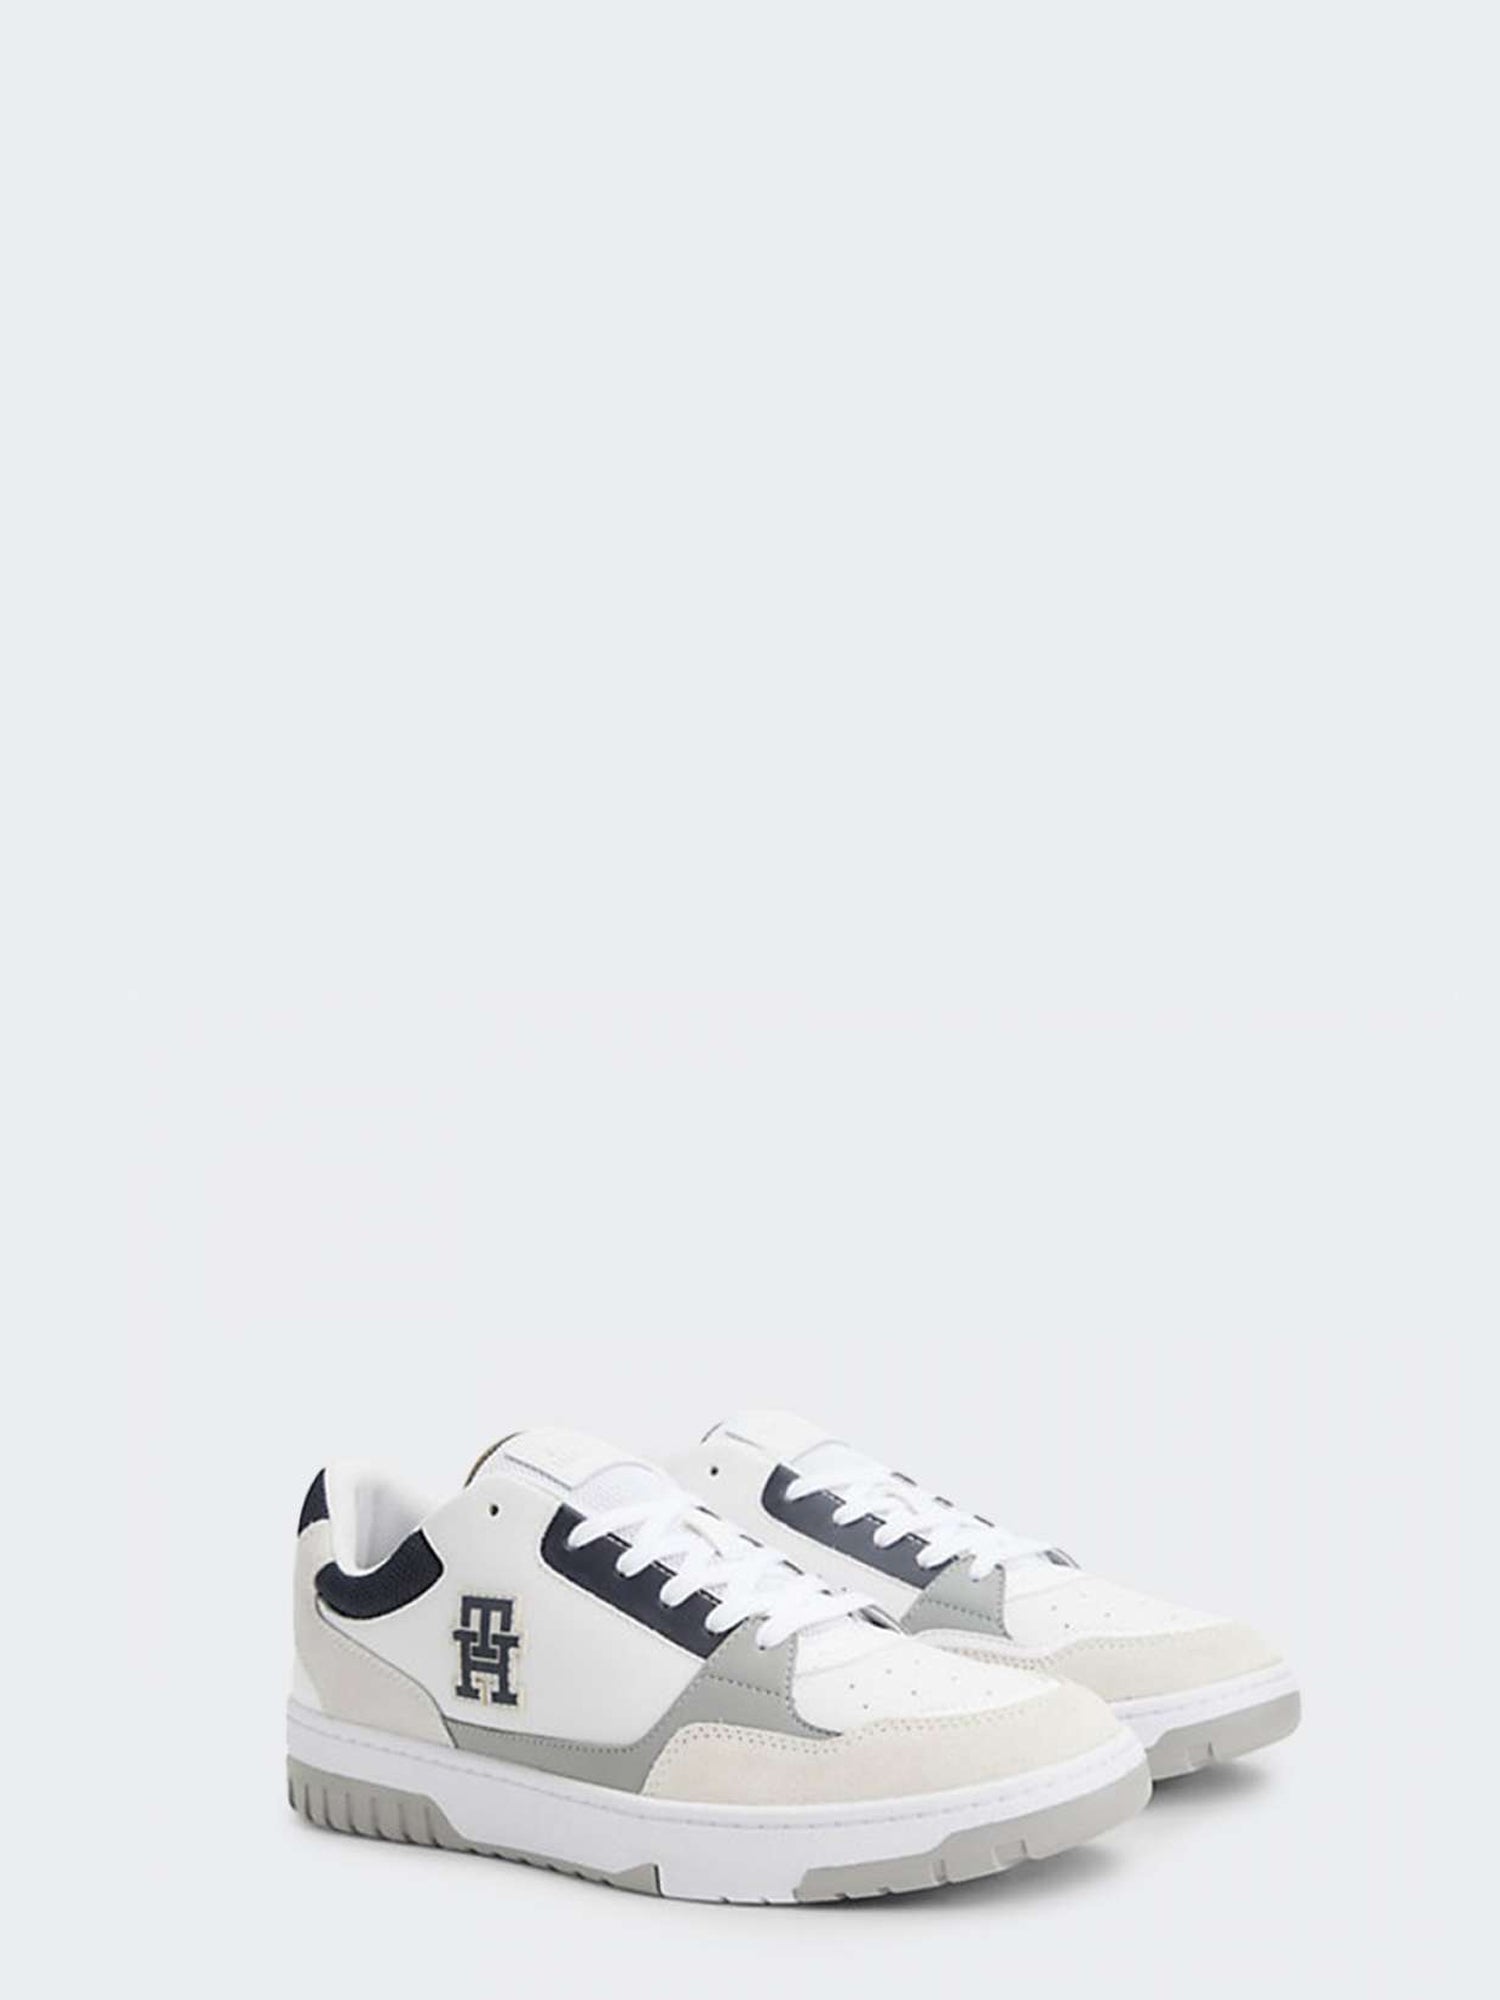 TOMMY HILFIGER SHOES BASSE IN PELLE BIANCO-GRIGIO